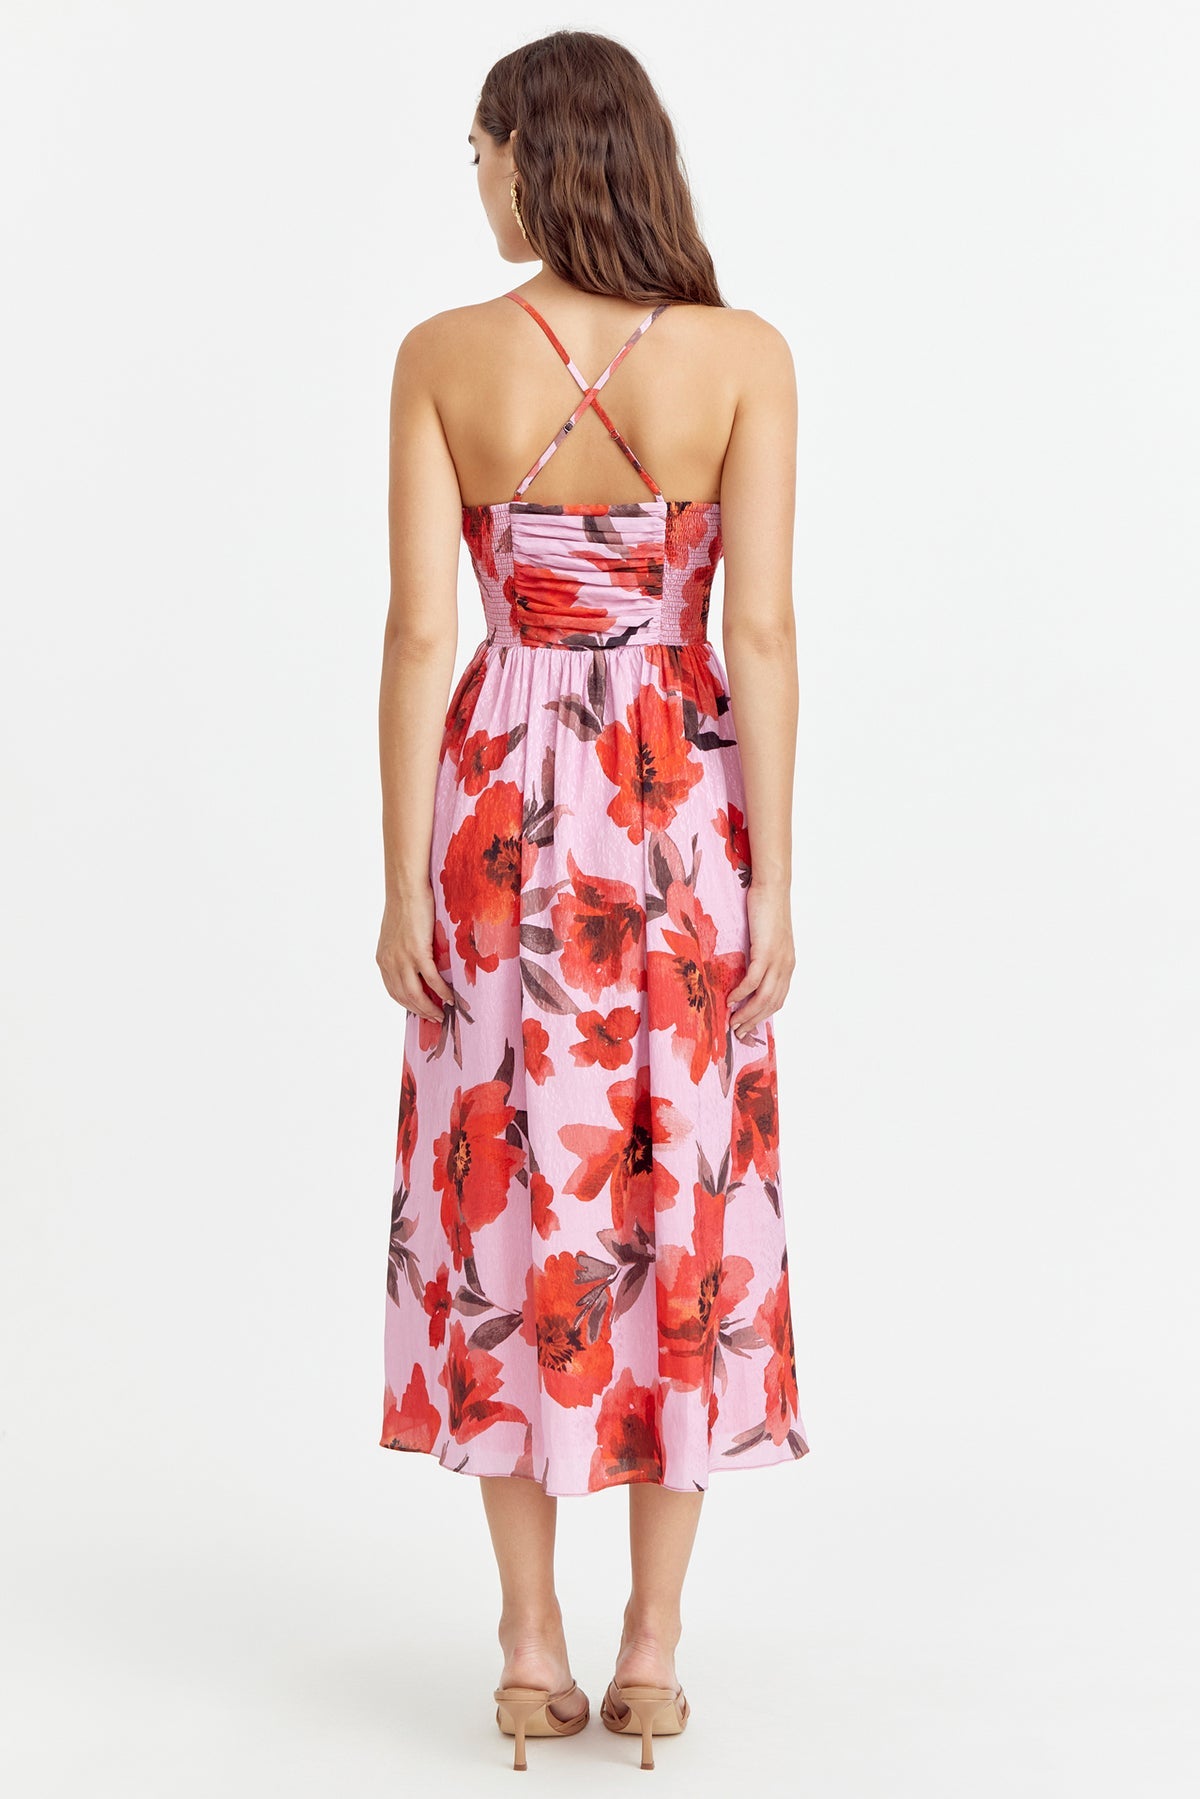 Luanne Floral Midi Dress in Pink Red in Adelyn Rae